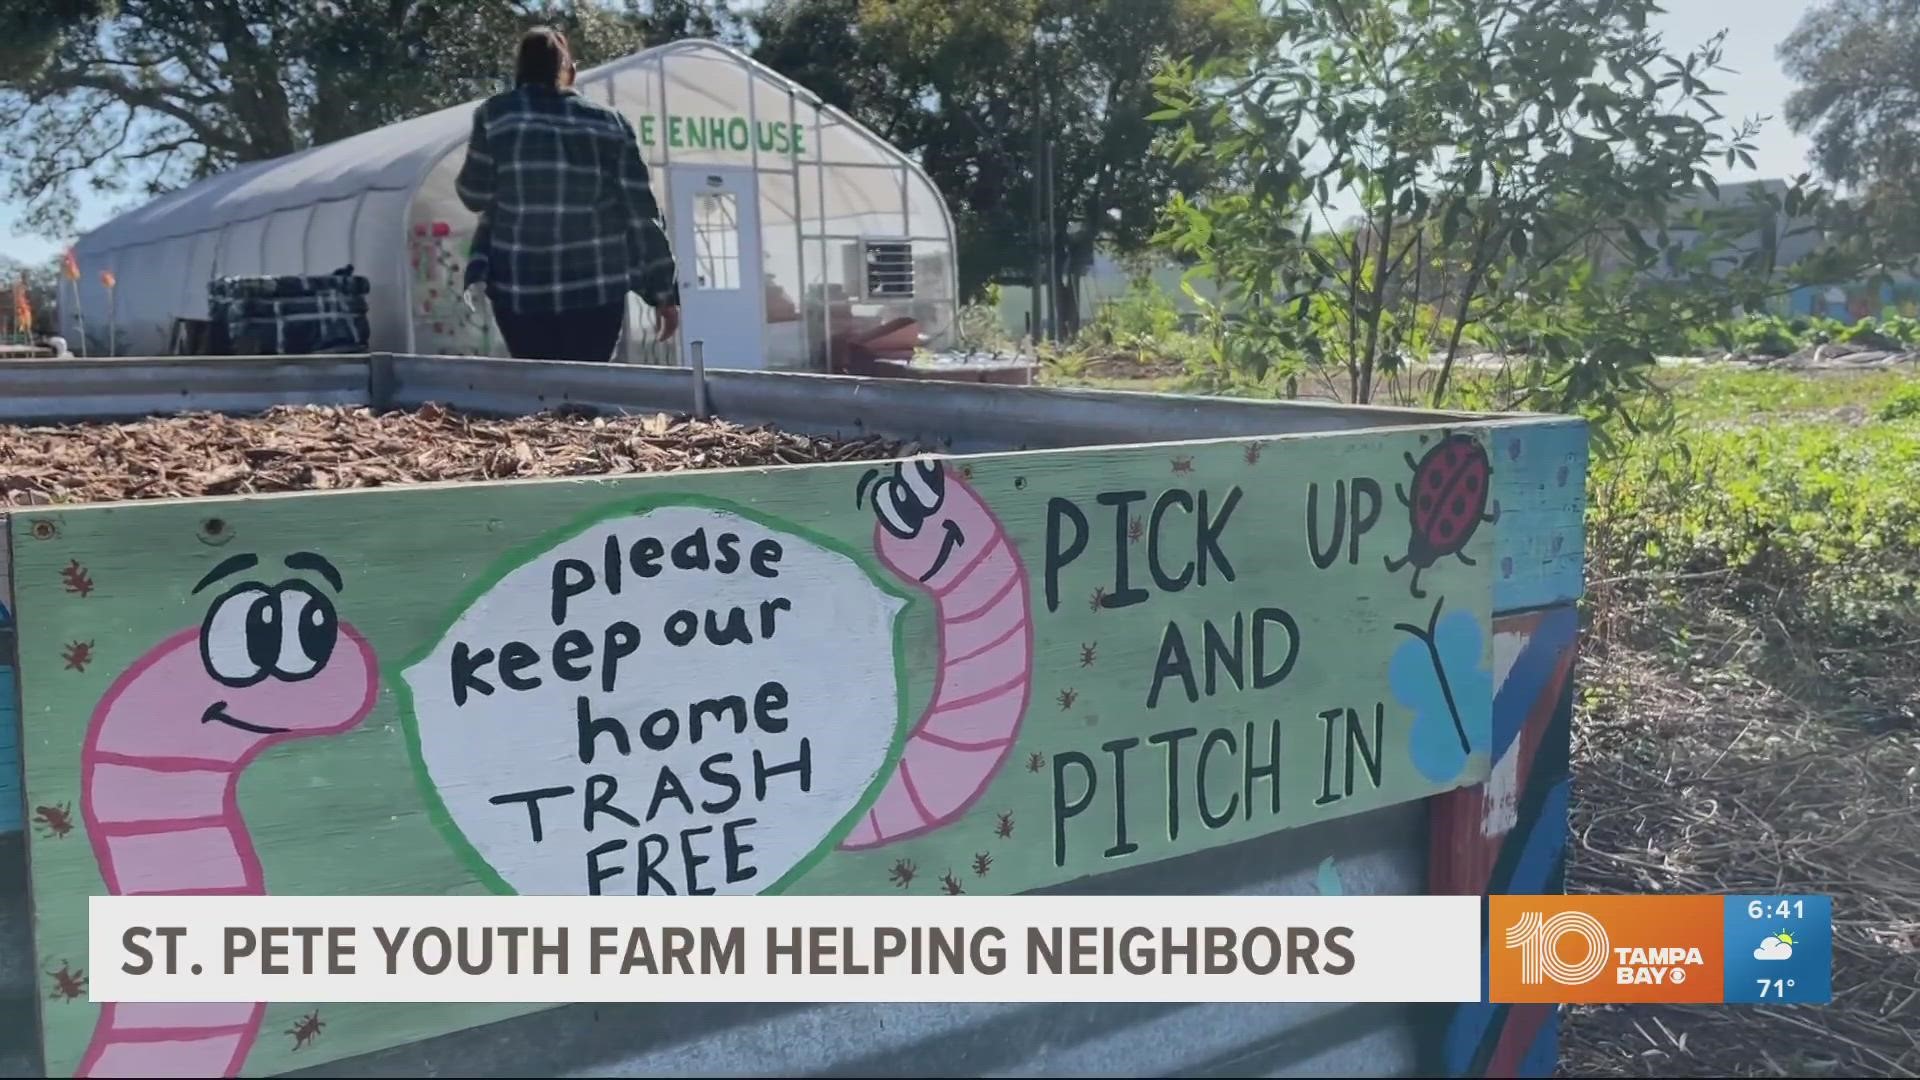 About 20 young people are employed at the community farm.